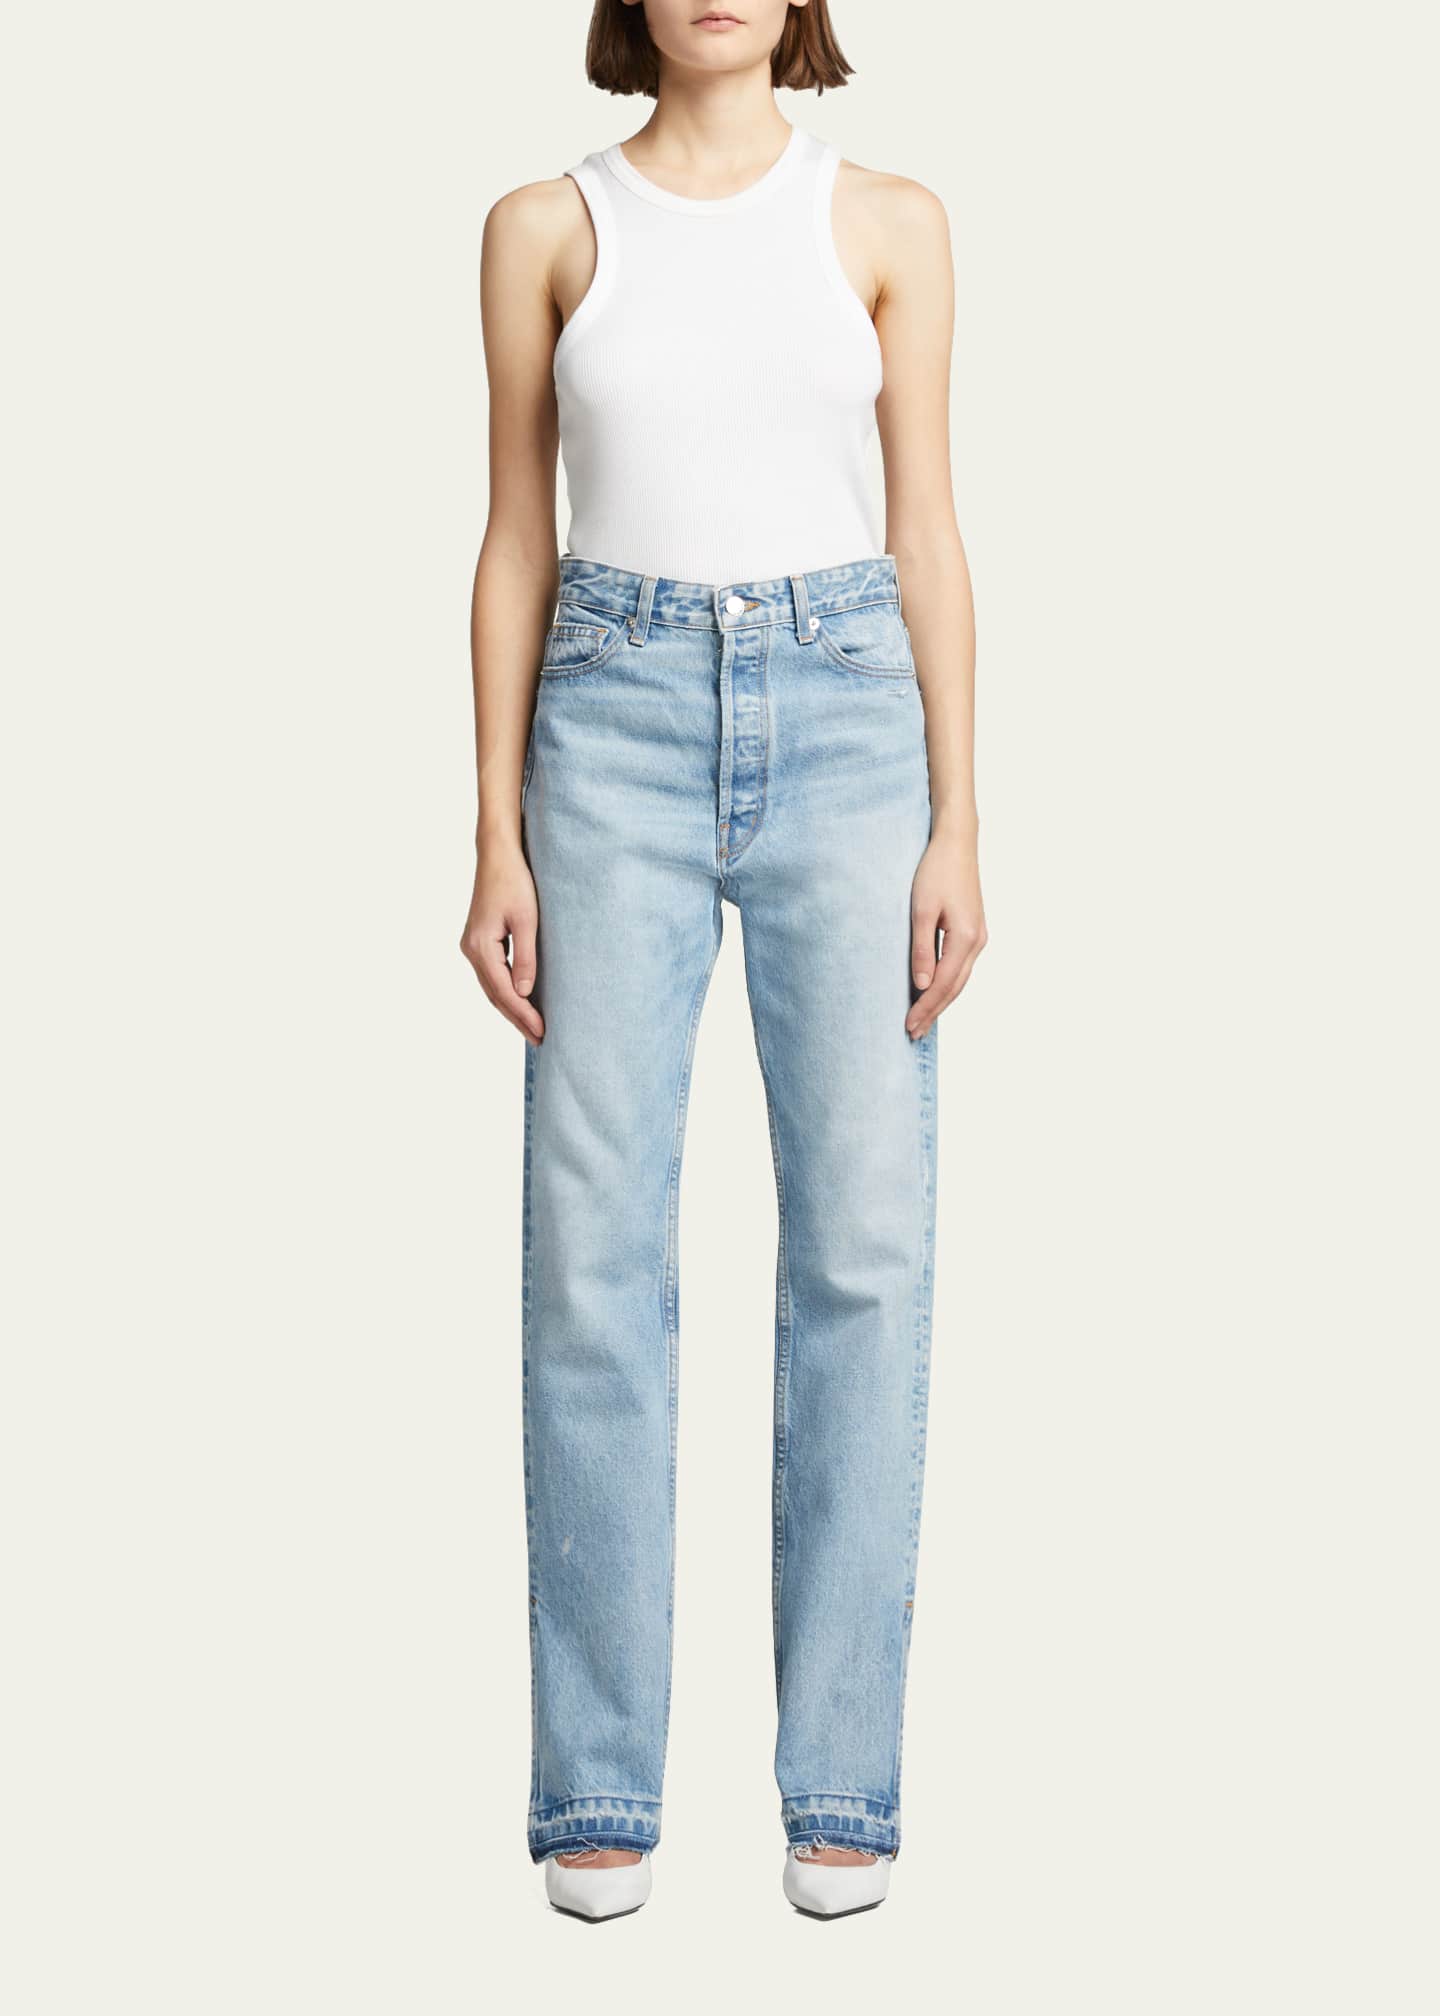 EB DENIM Unraveled Two Jeans -